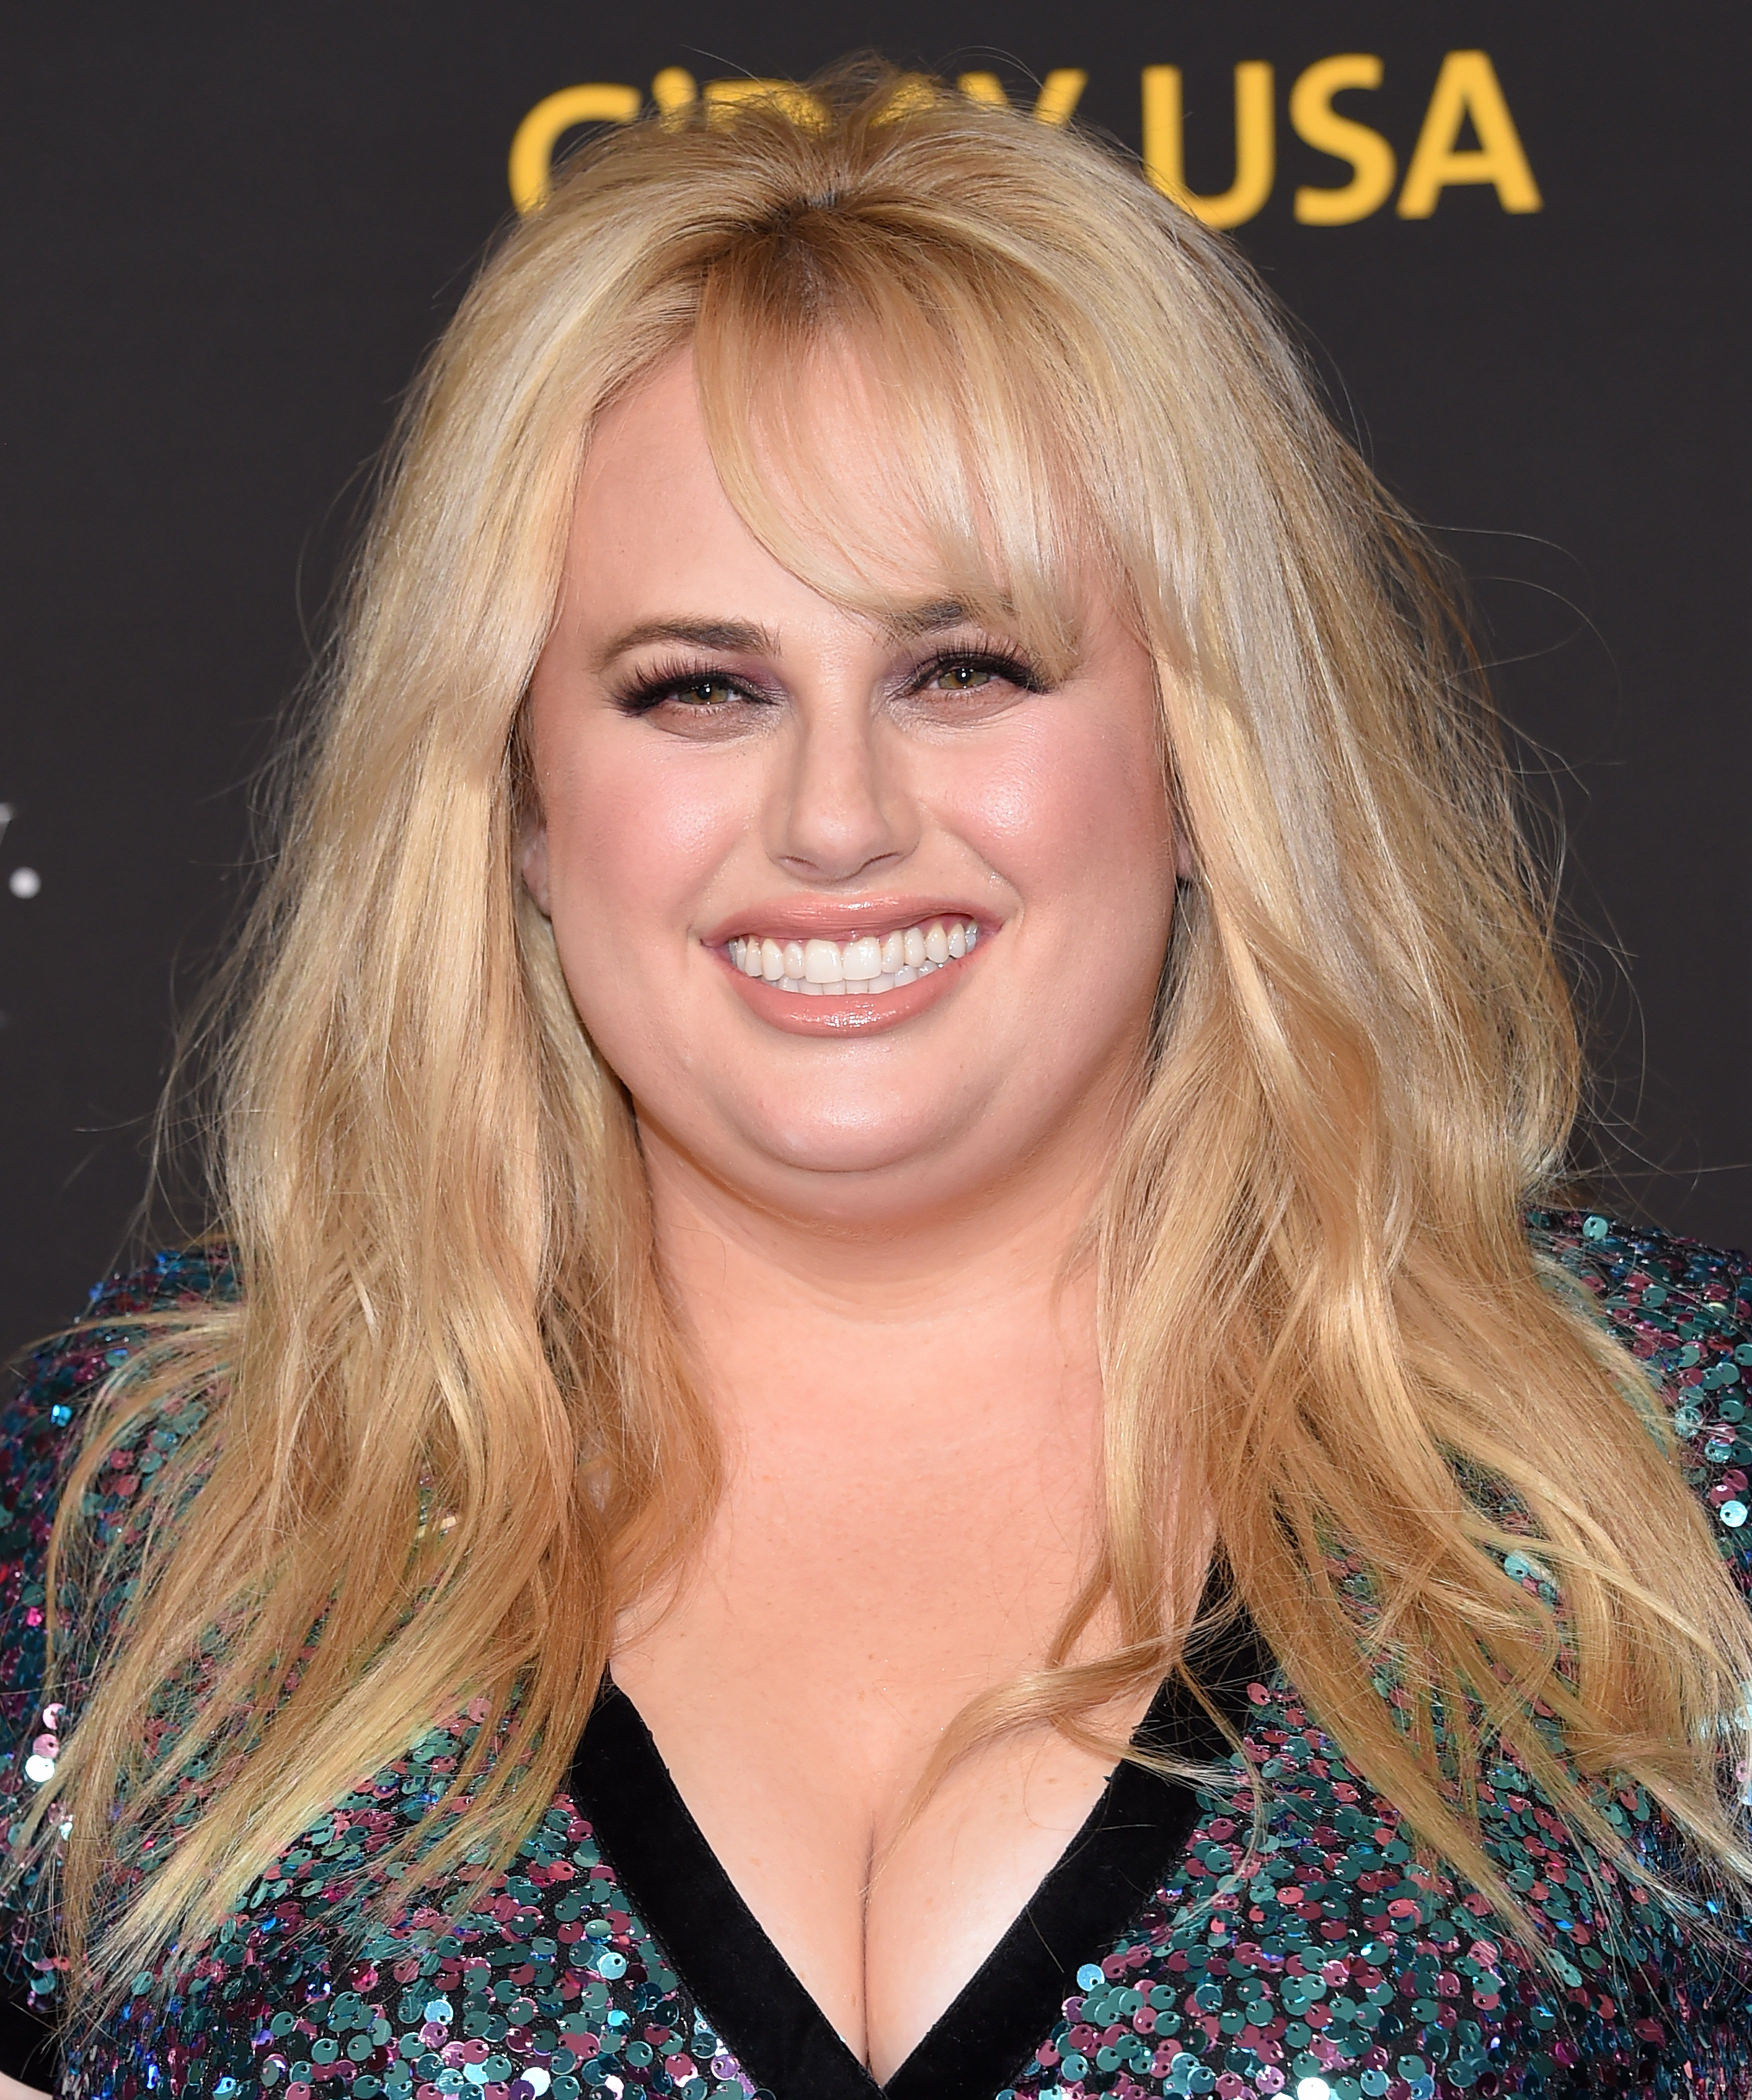 Is This Really The Popular 'Pitch Perfect' Actress Rebel Wilson?